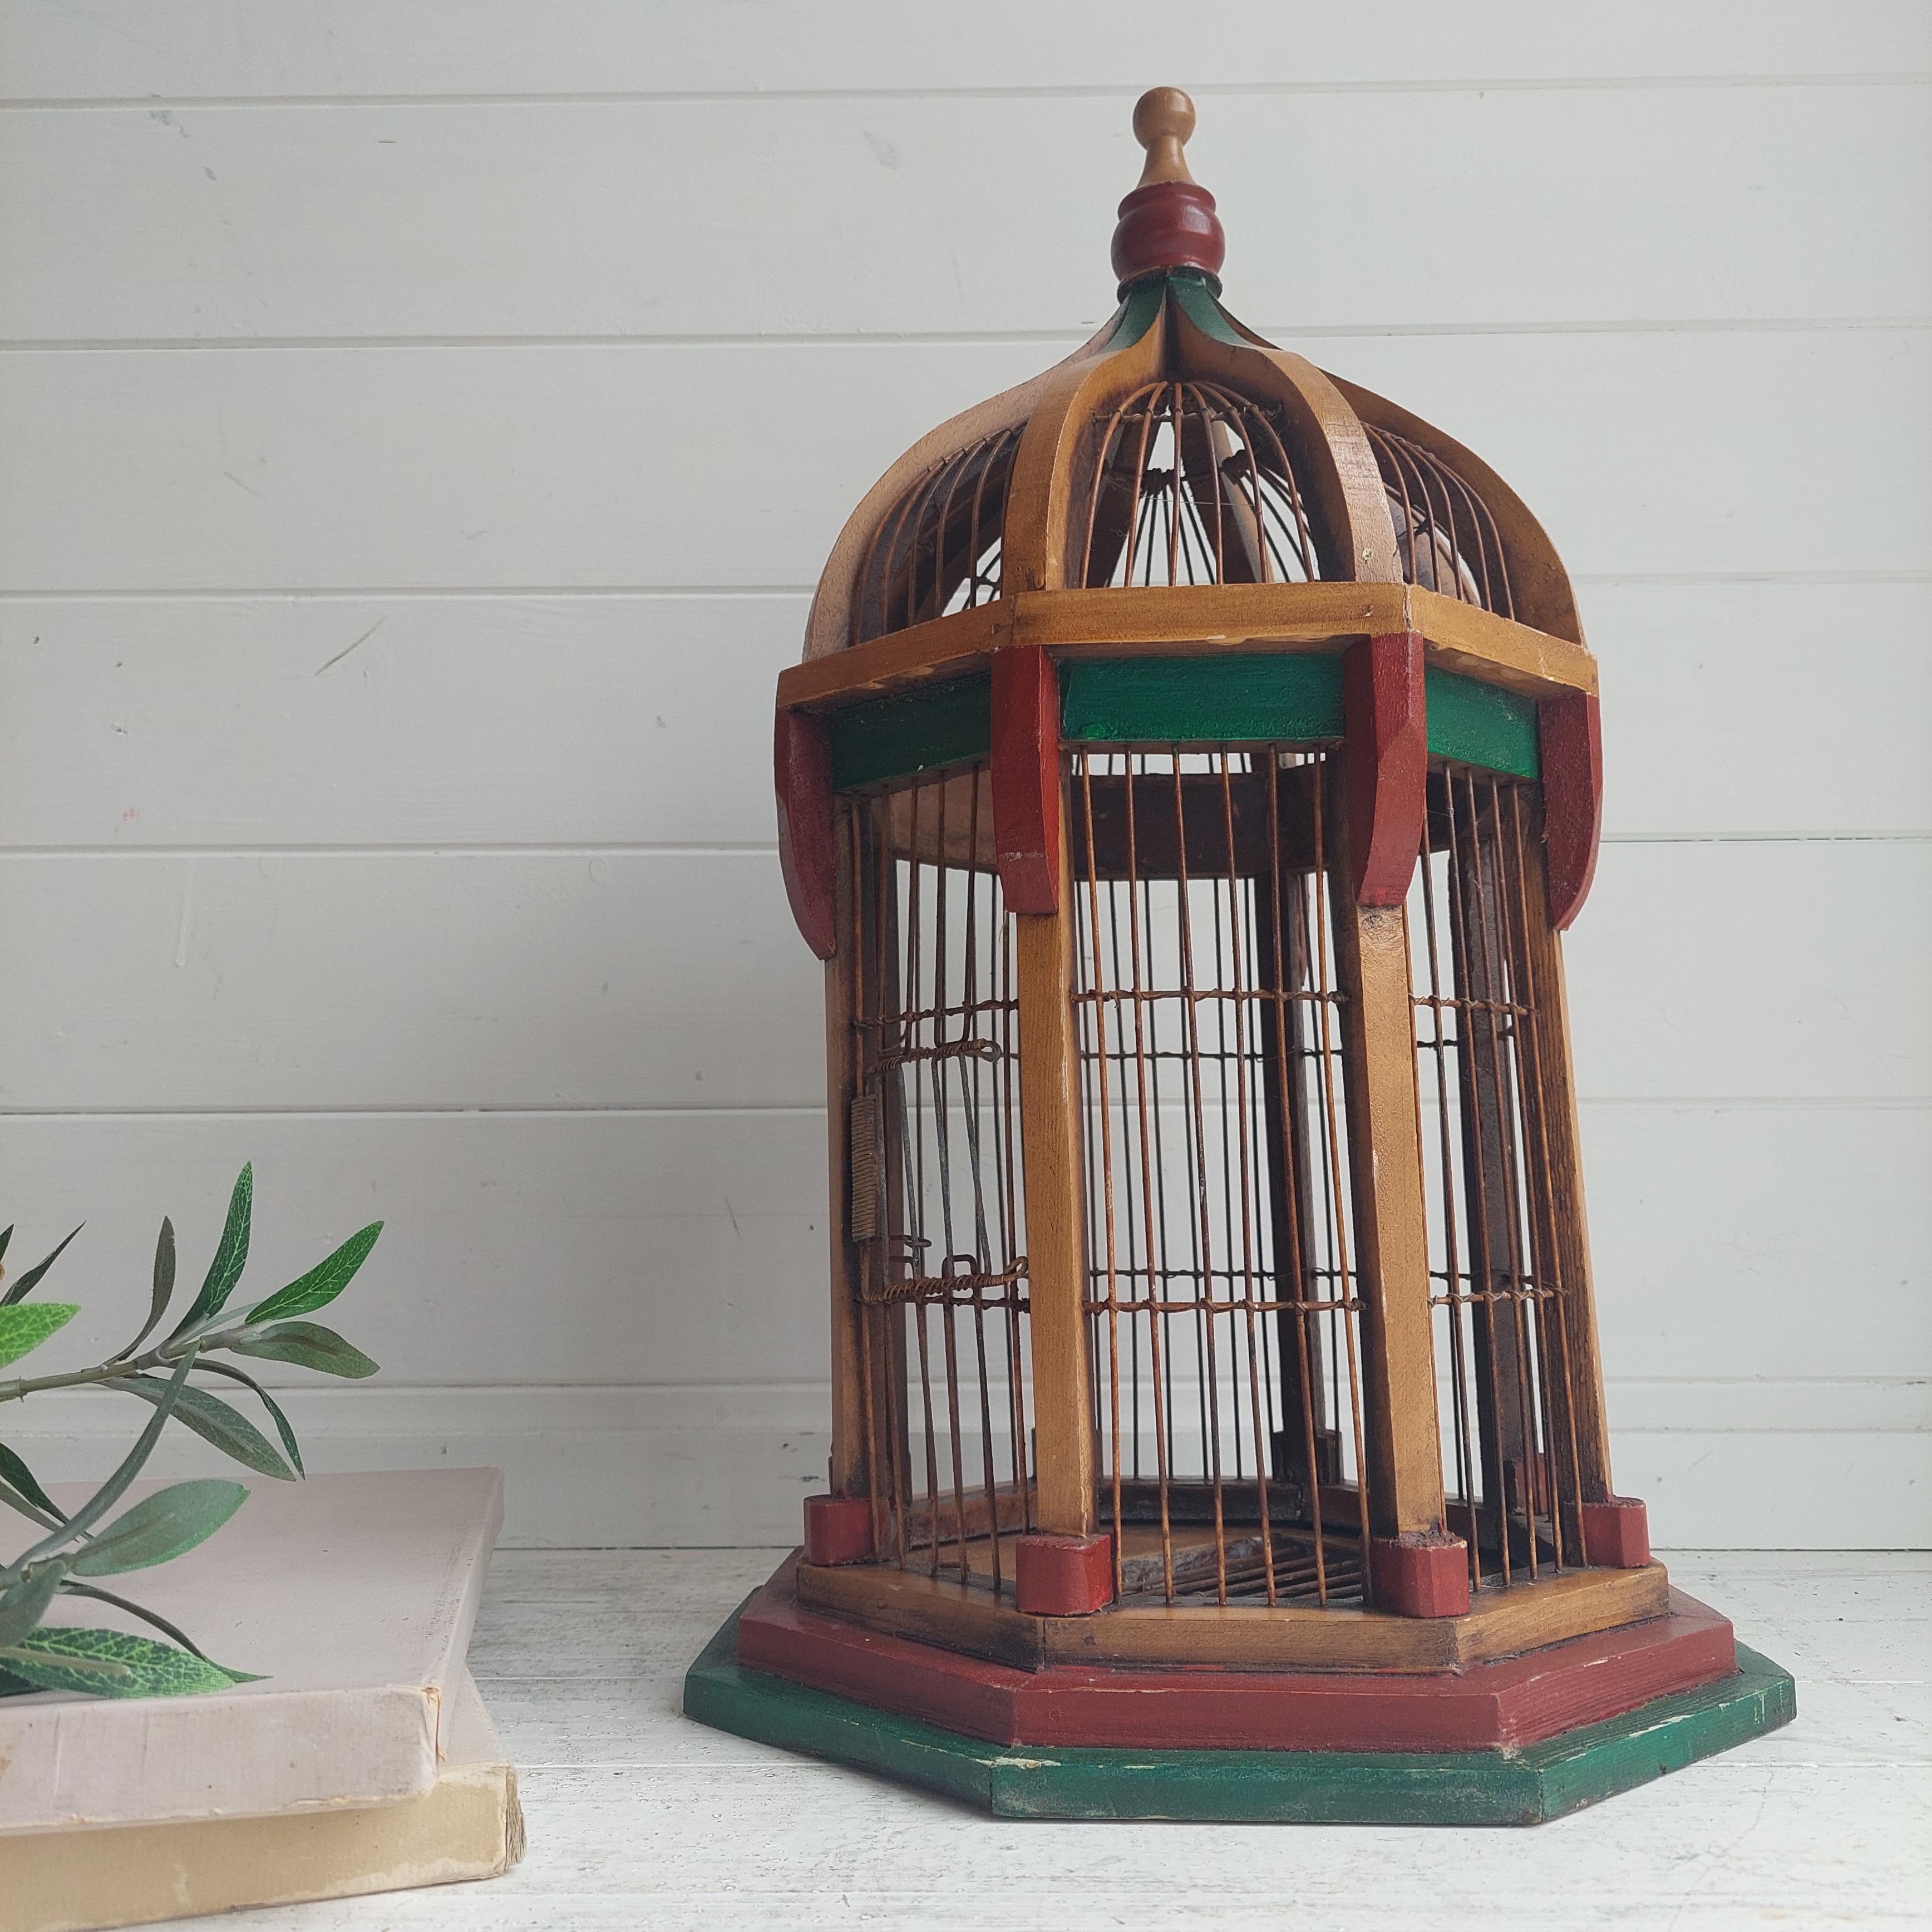 Vintage Victorian Wood Metal Wire Dome Bird Cage Home Decor
Medium sized Antique Style Bird House Cage Wood & Wire Vintage Old Polygon French. - Wood with Metal wire. 

A very elegant Victorian architectural cupola shaped bird cage with original